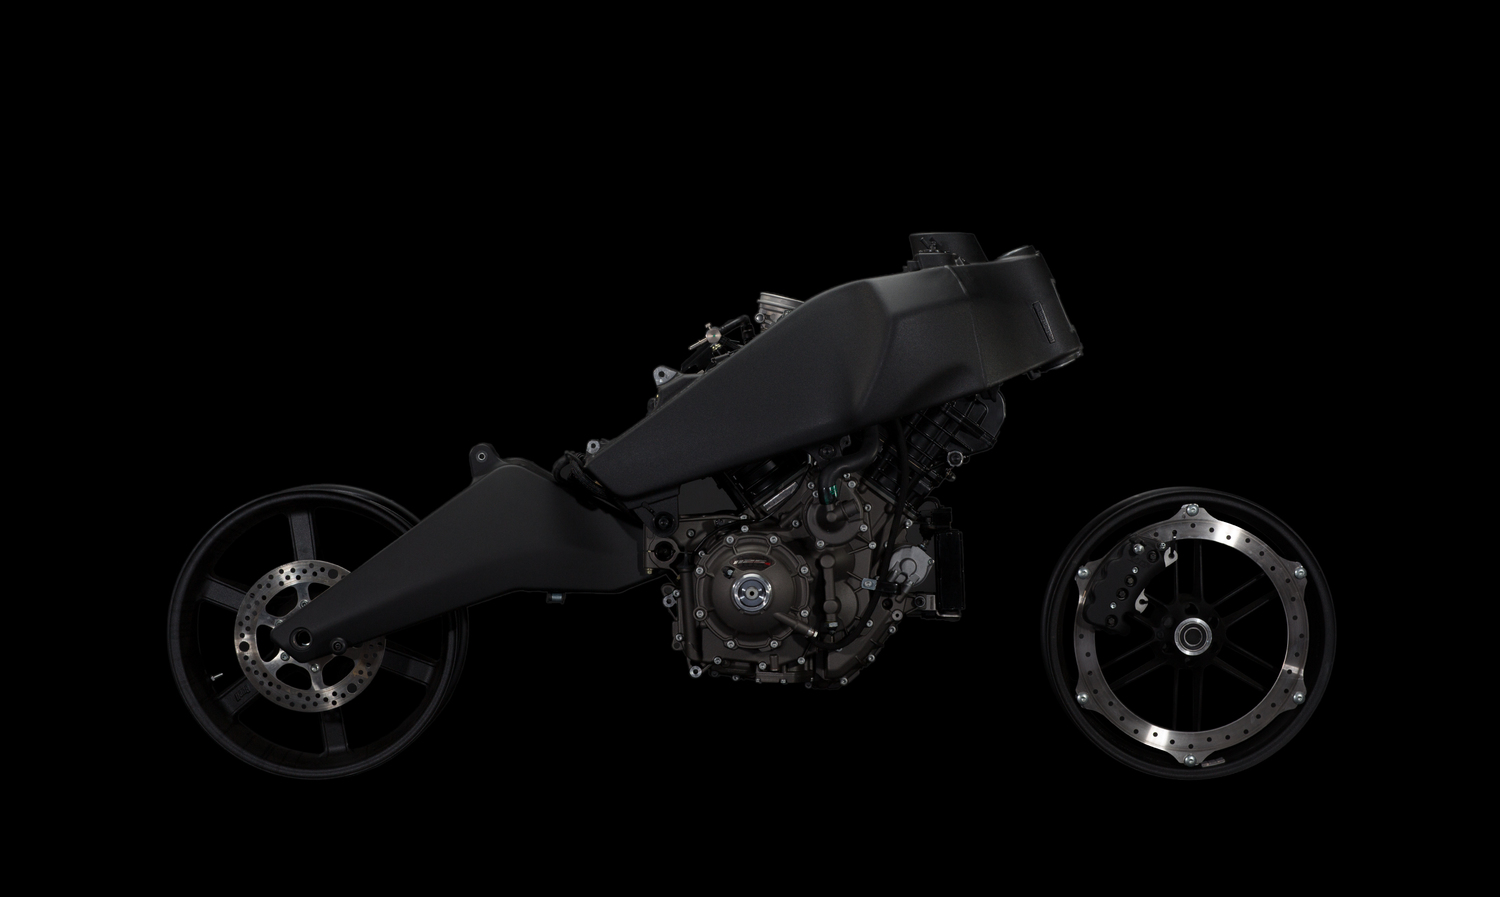 Firearm firm's Buell 1125R-based concept lives